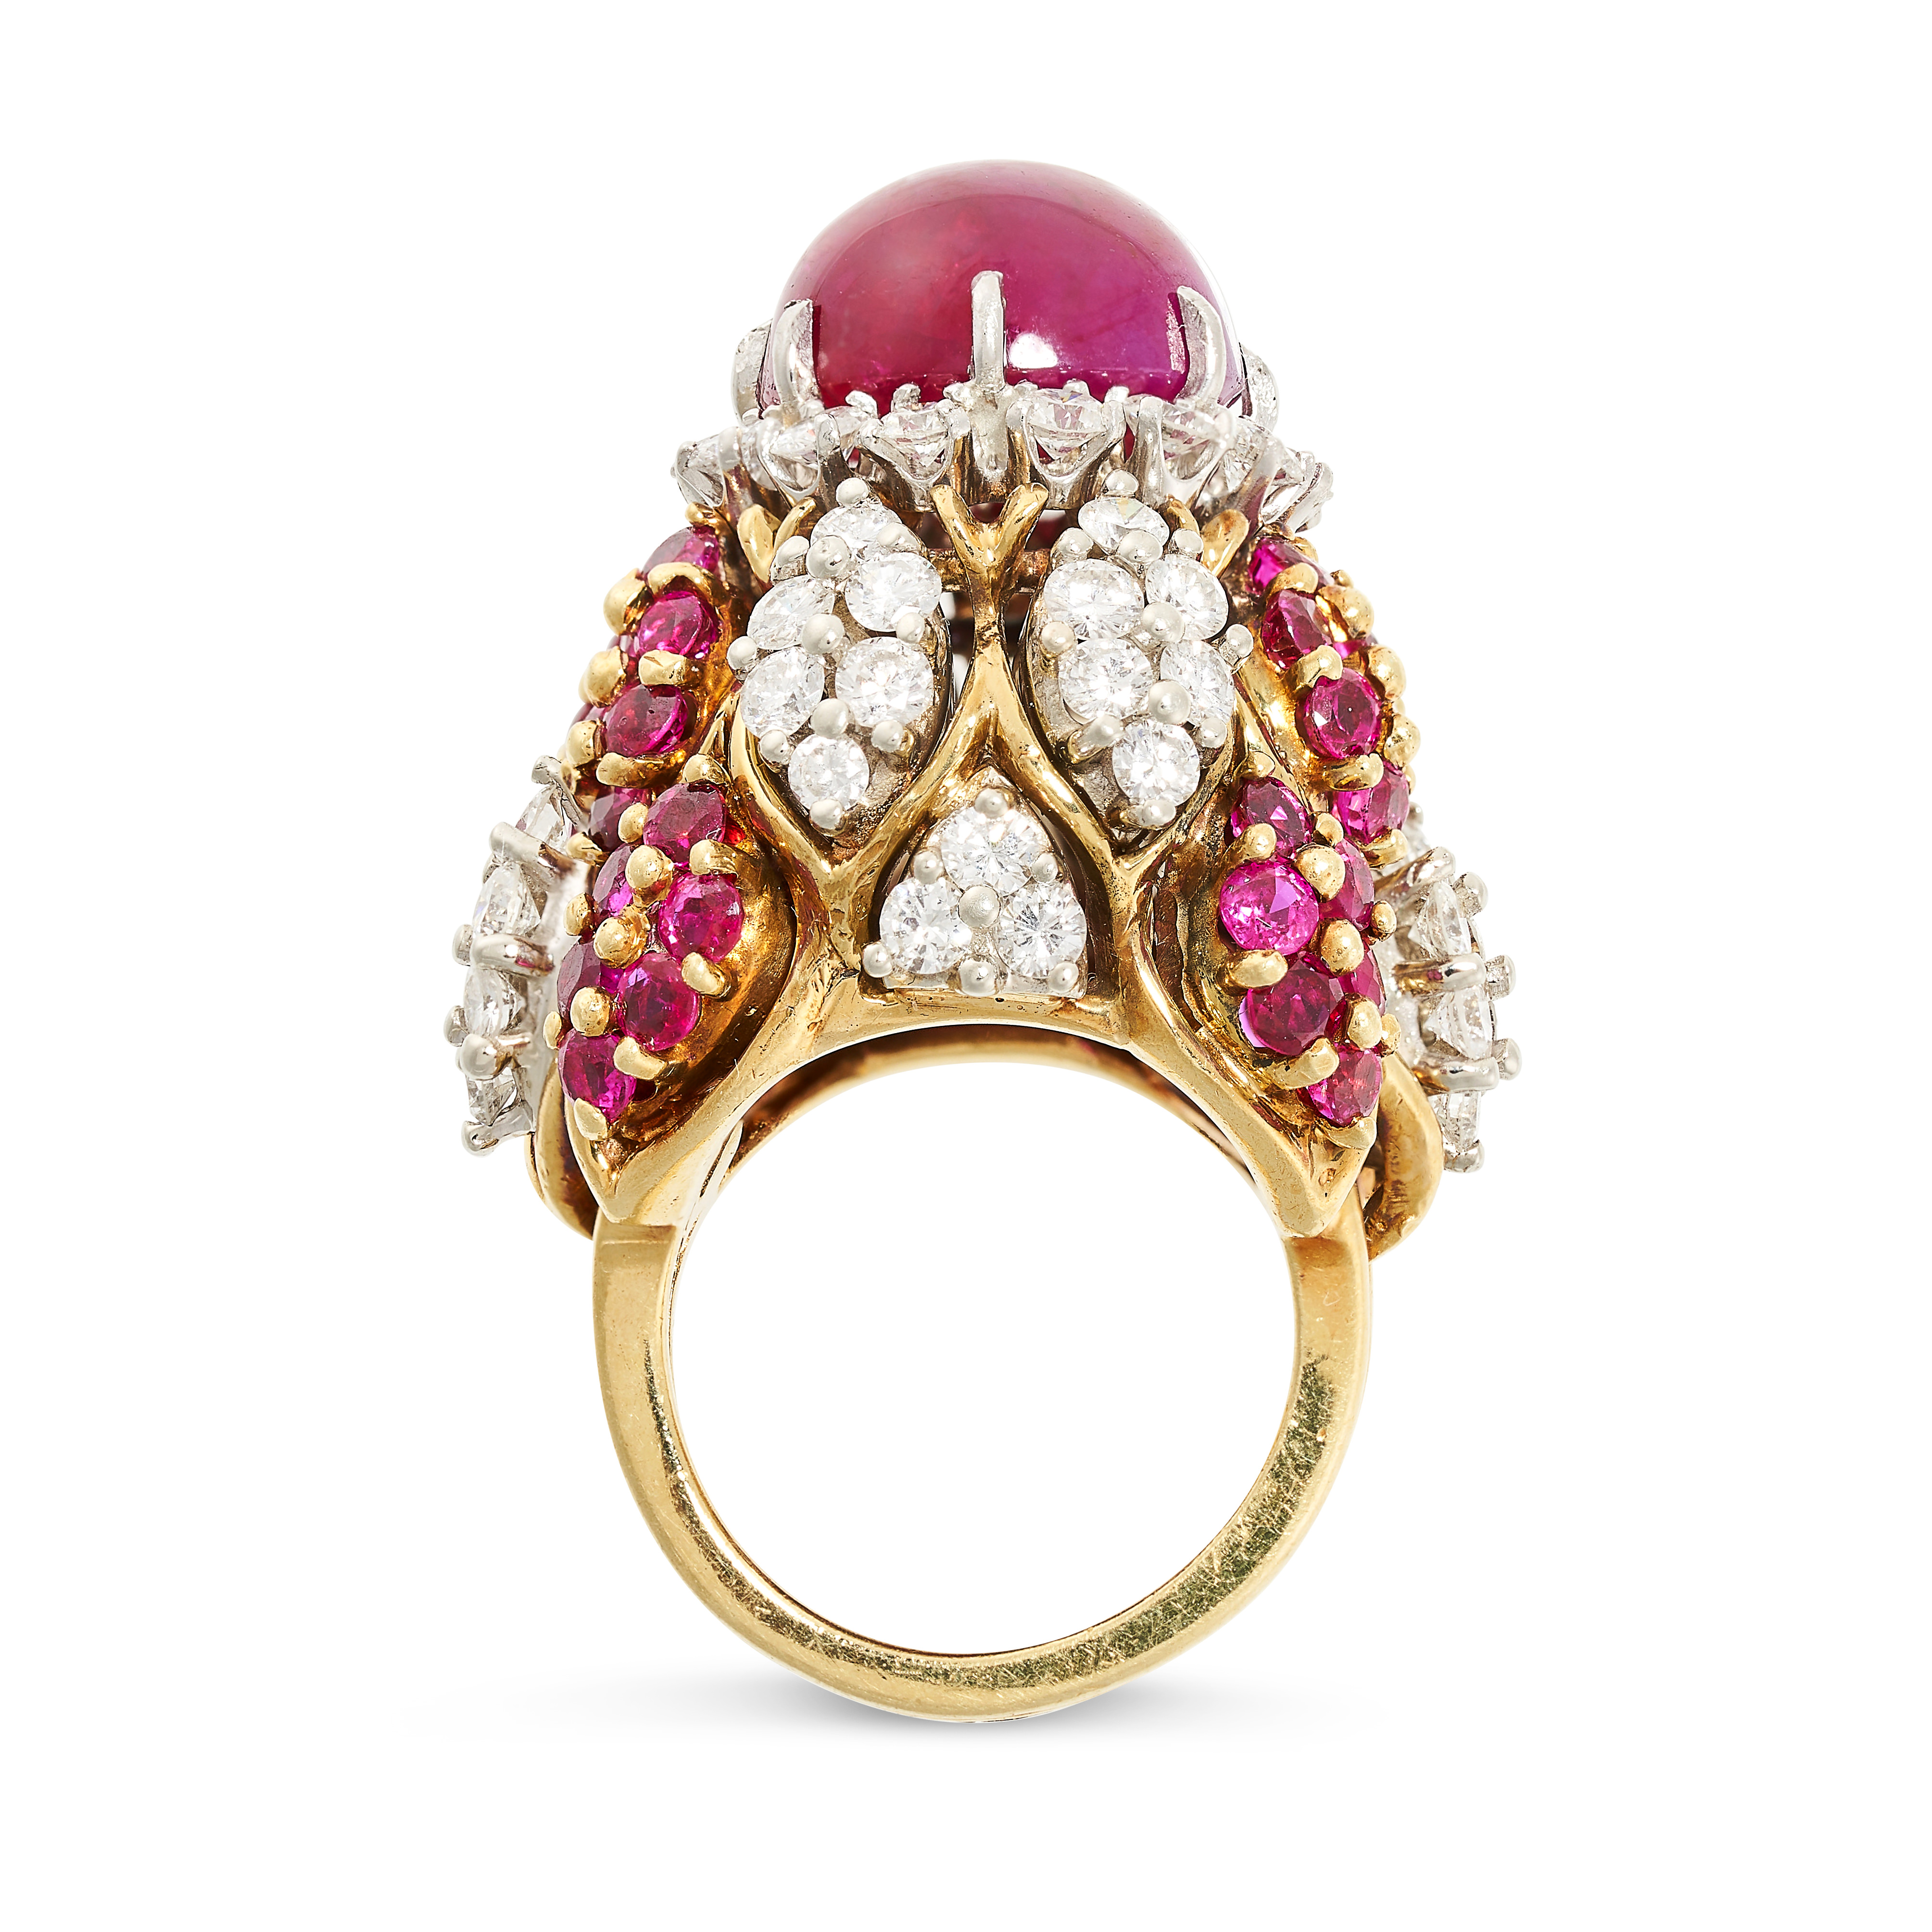 A VINTAGE RUBY AND DIAMOND COCKTAIL RING in yellow gold, set with a cabochon ruby of 16.83 carats in - Image 2 of 2